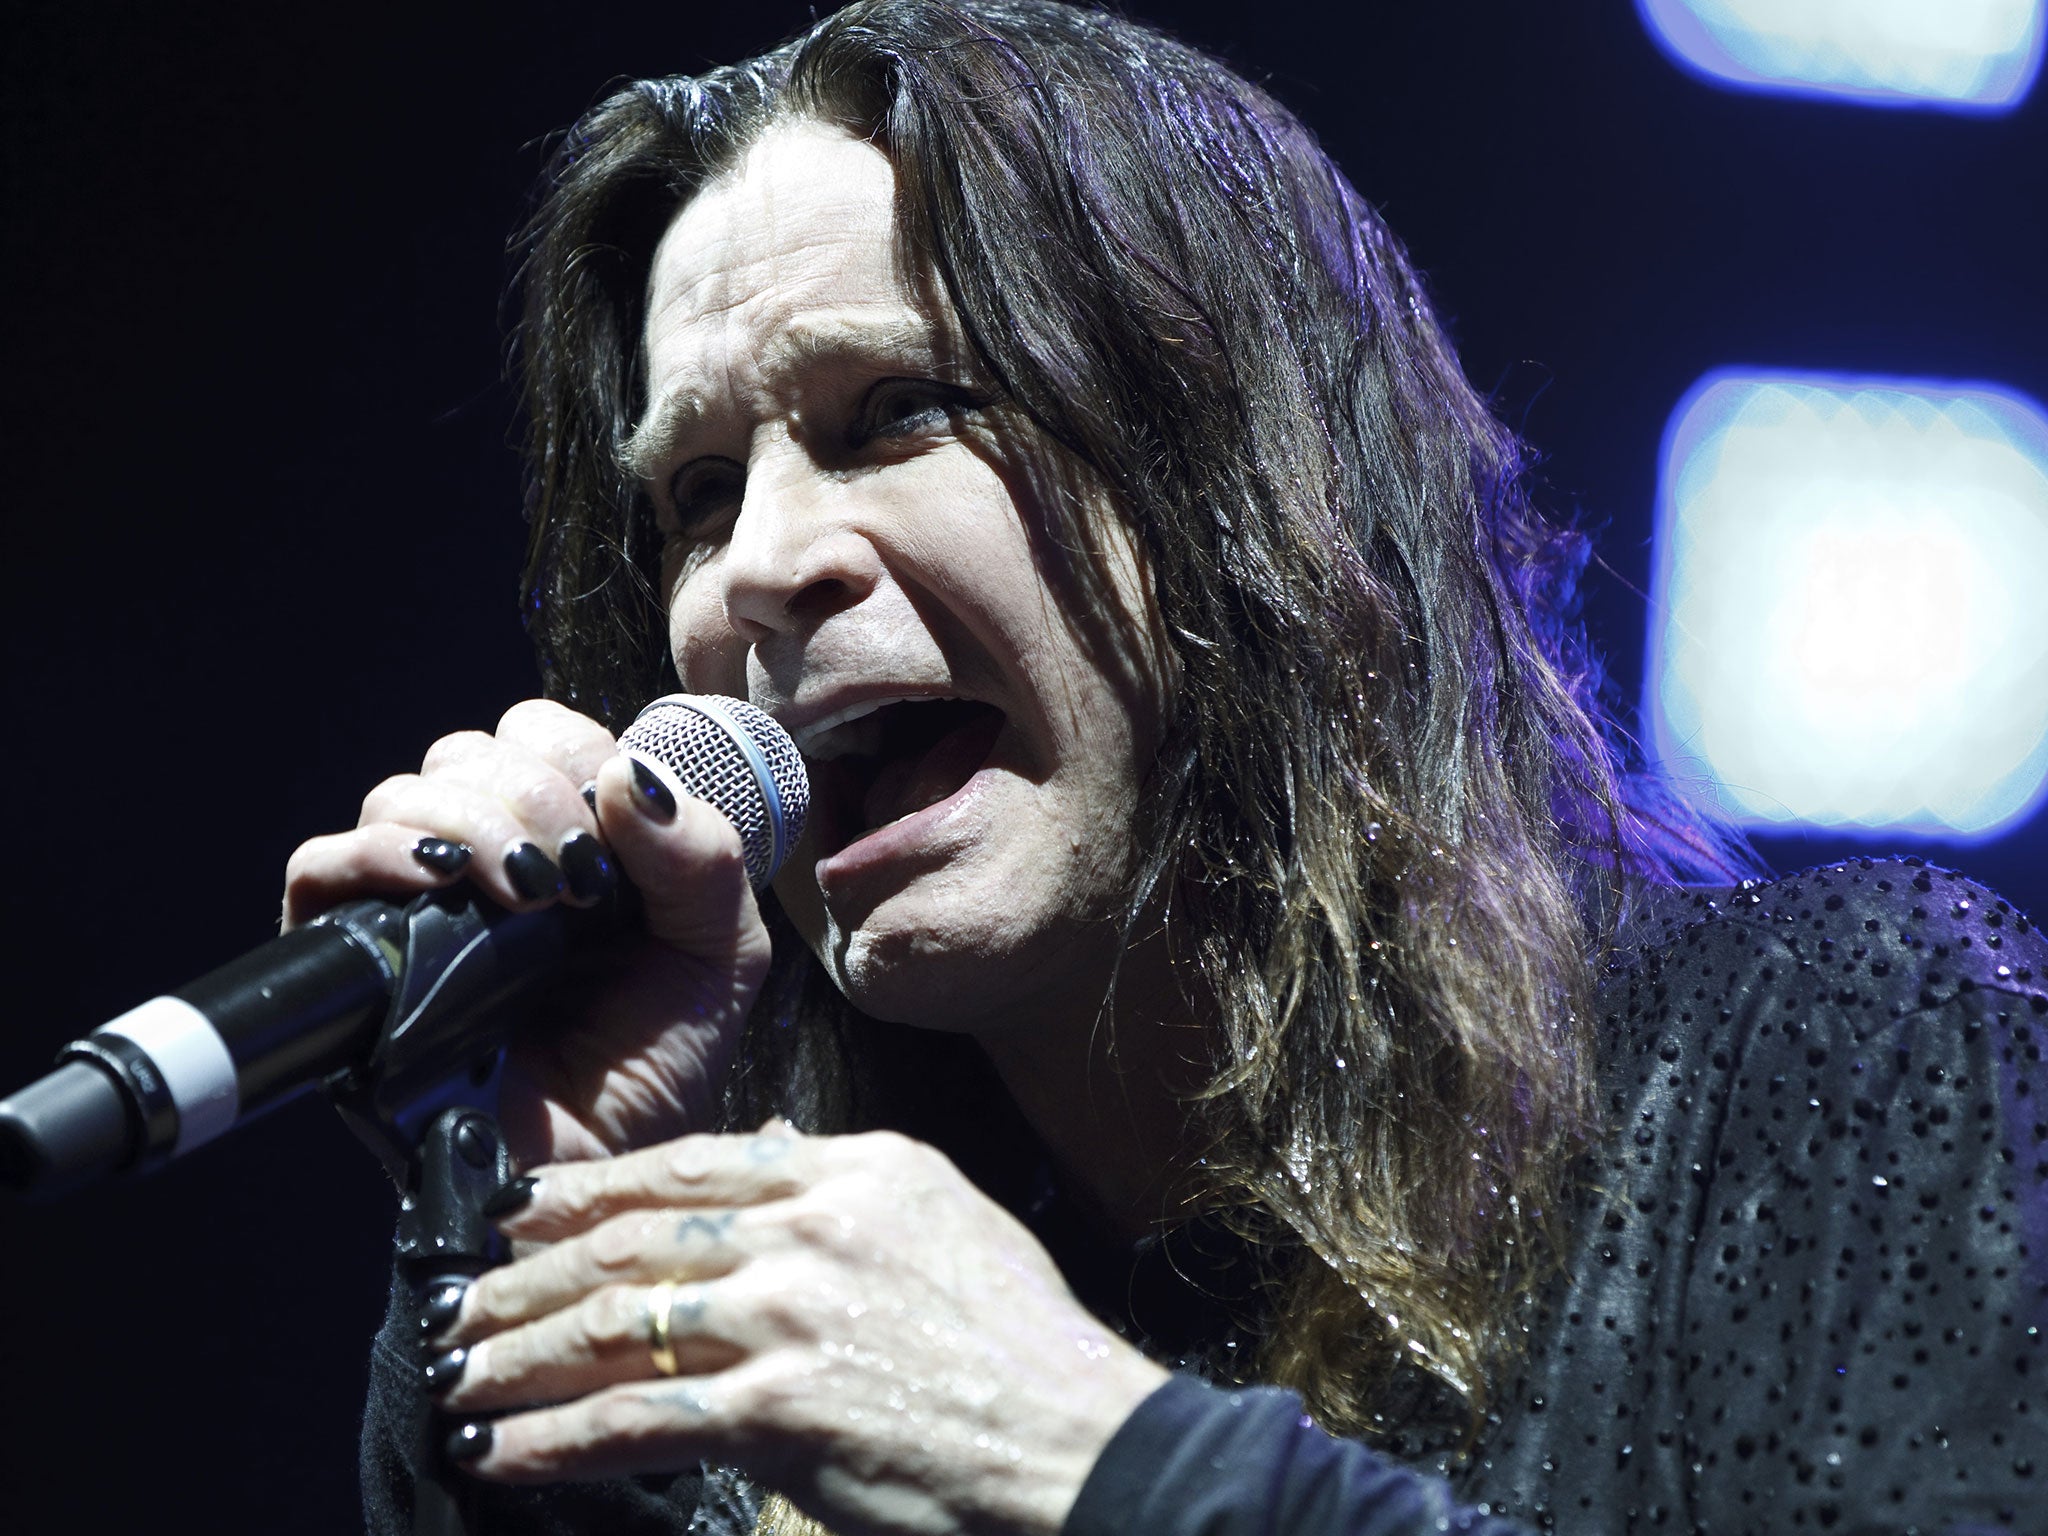 Musician and reality TV star, Ozzy Osbourne, comes in at number six